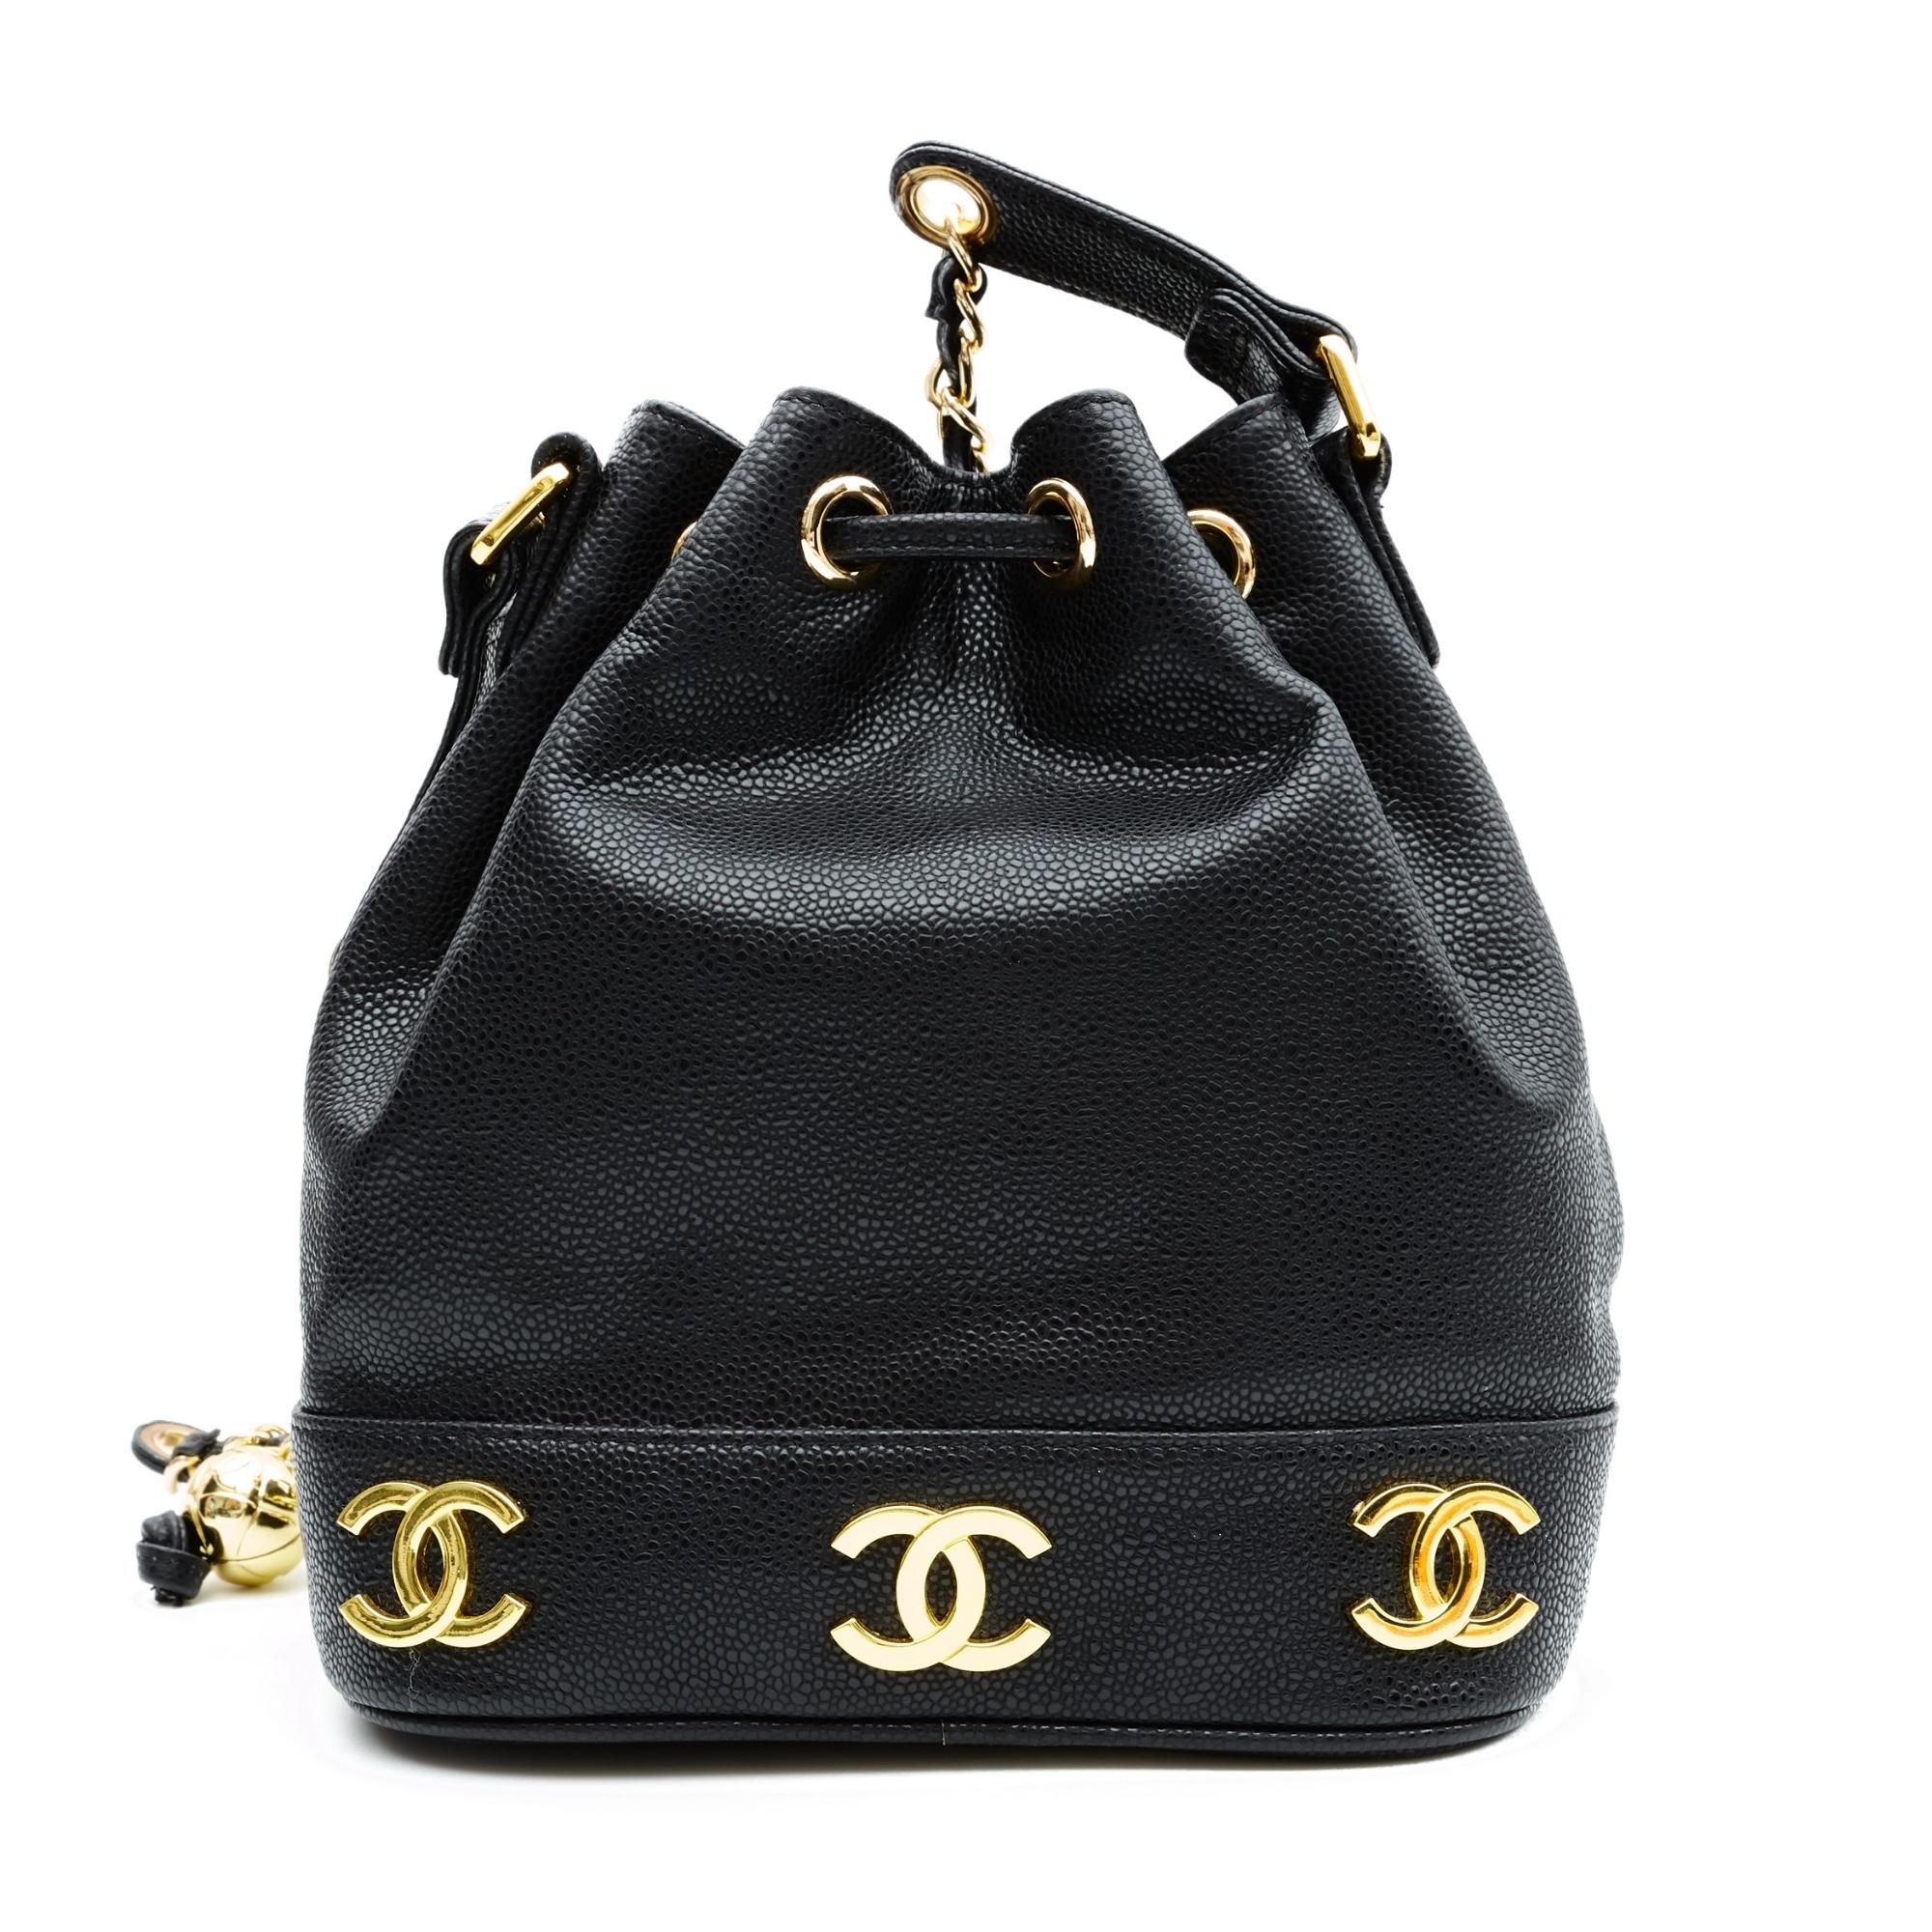 This bag is made with fine caviar leather structured in a bucket shape. The bag features the Chanel logo in gold tone around the base, a gold tone chain interlaced with leather, a leather shoulder pad, a leather pull cord for closure and a black